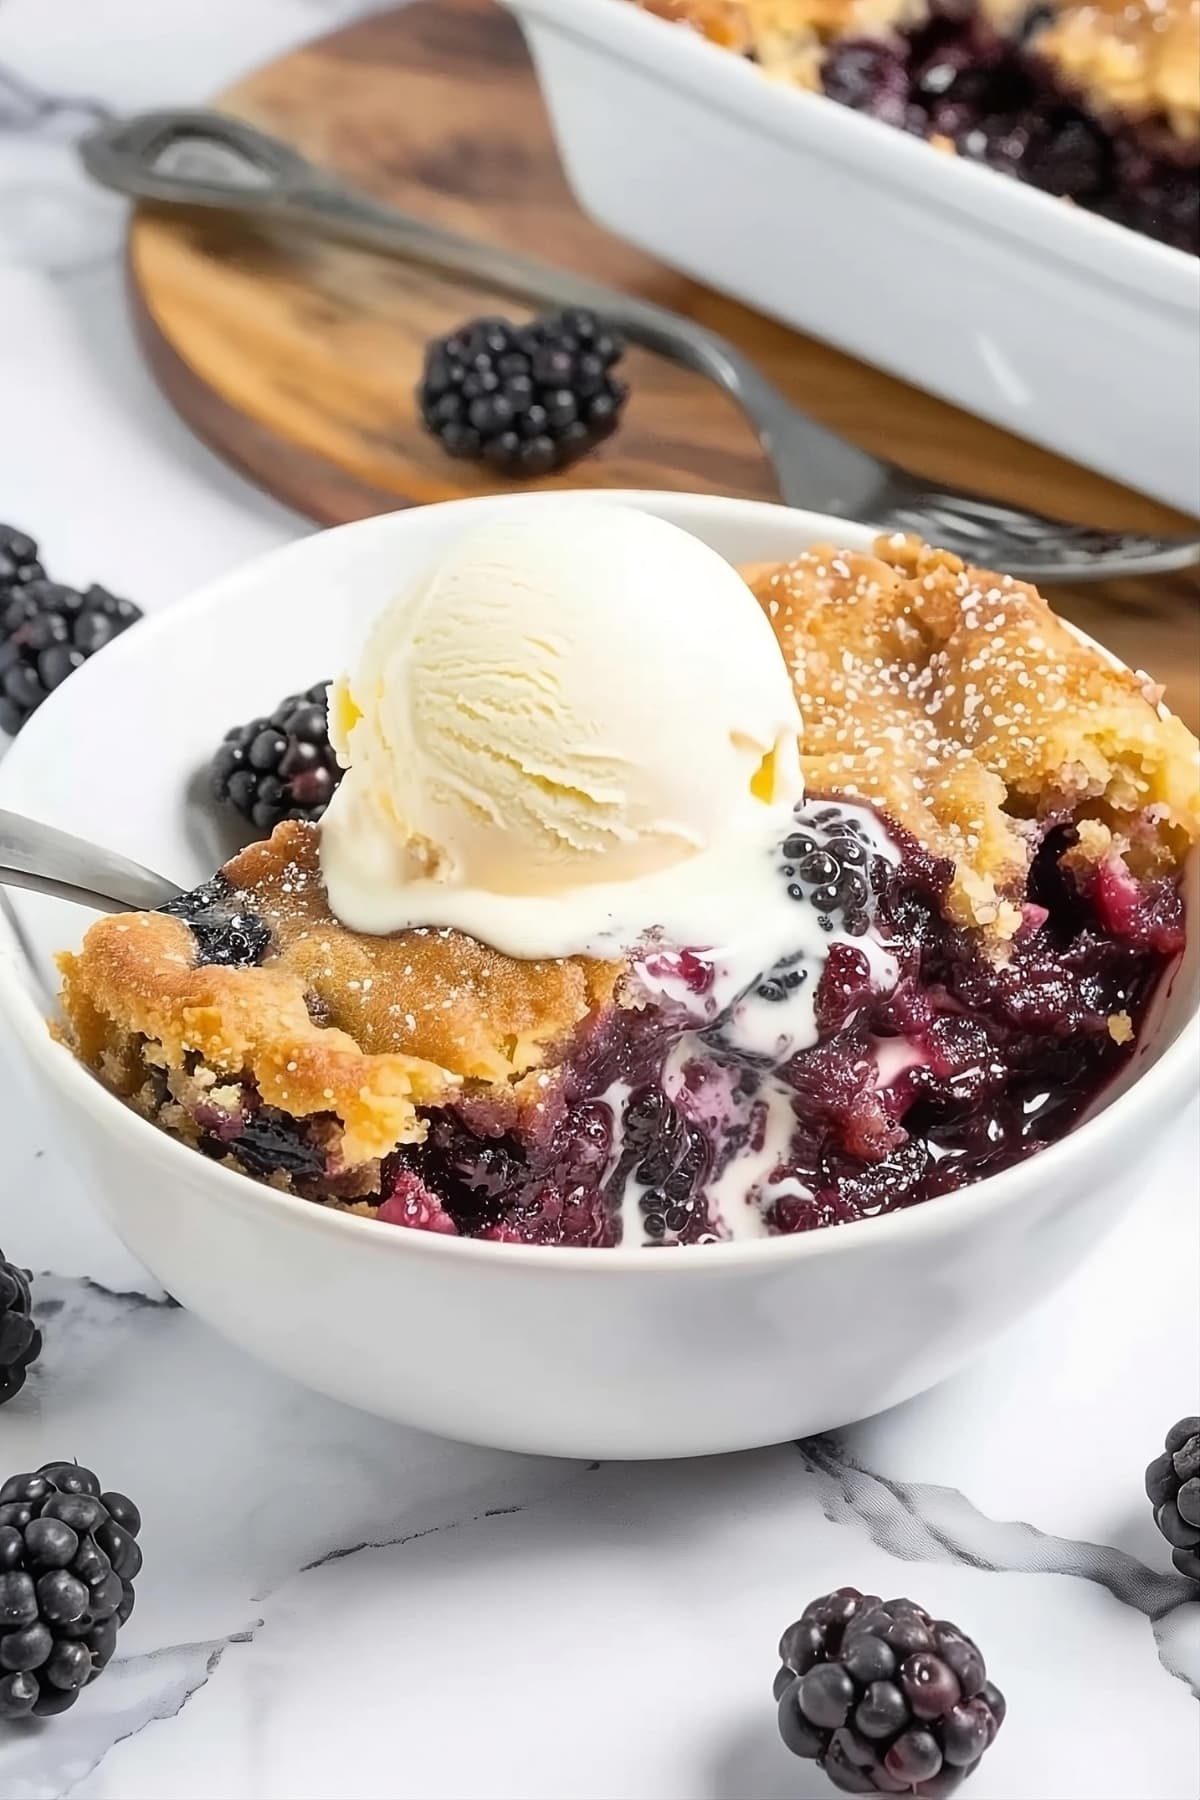 Blackberry dump cake in a white bowl with spoon garnished with vanilla ice cream scoop.